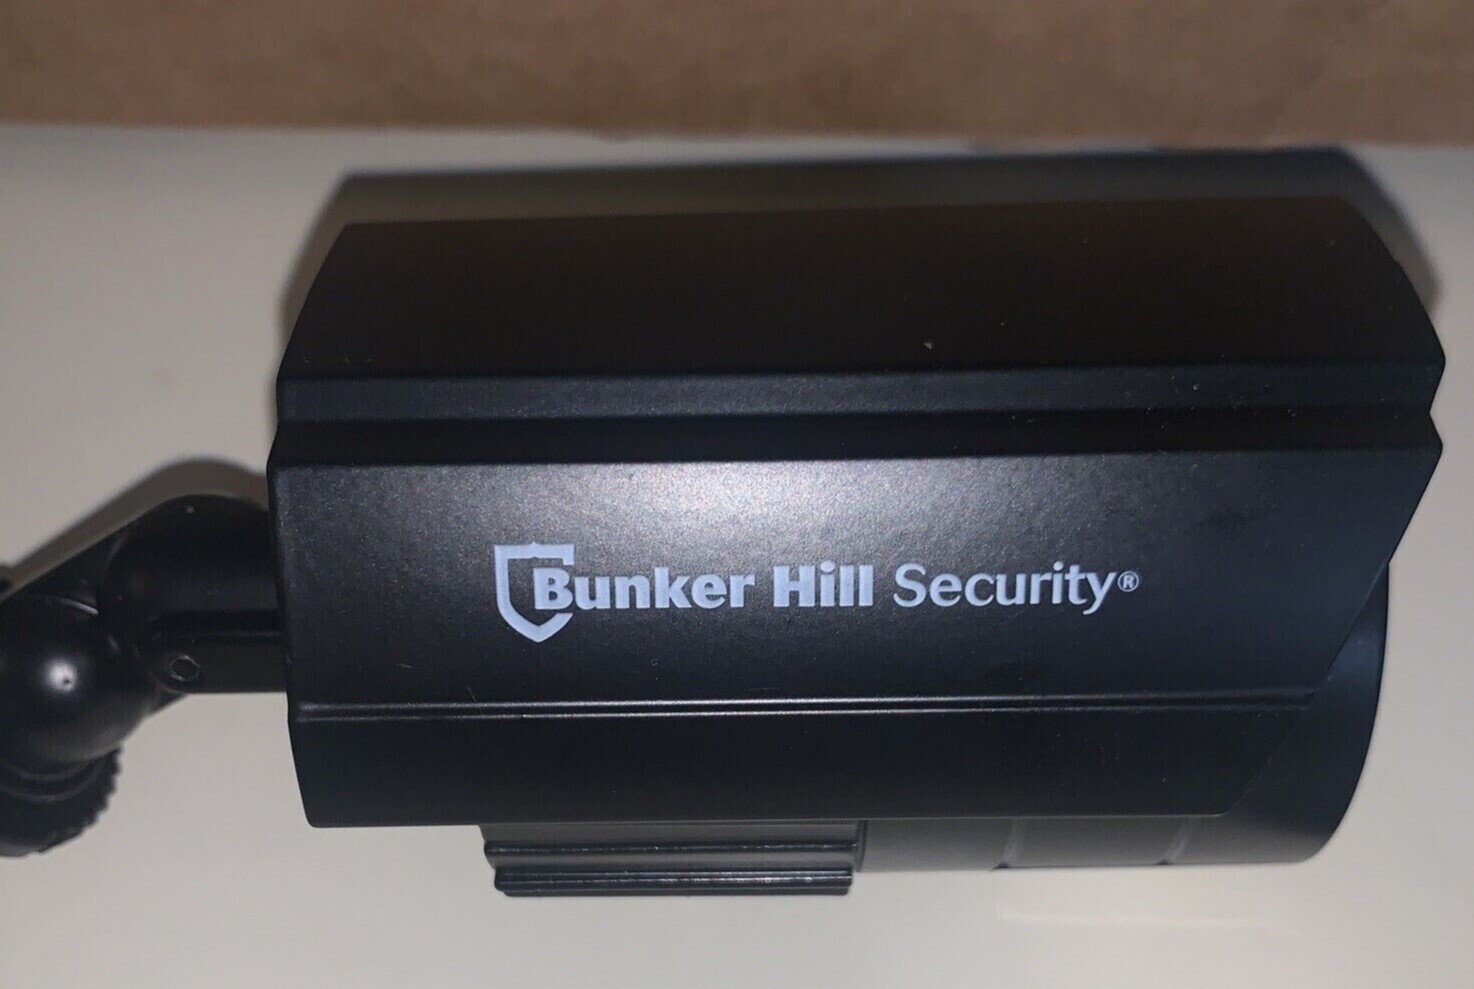 How Do I Connect My Bunker Hill Security Camera To My Phone